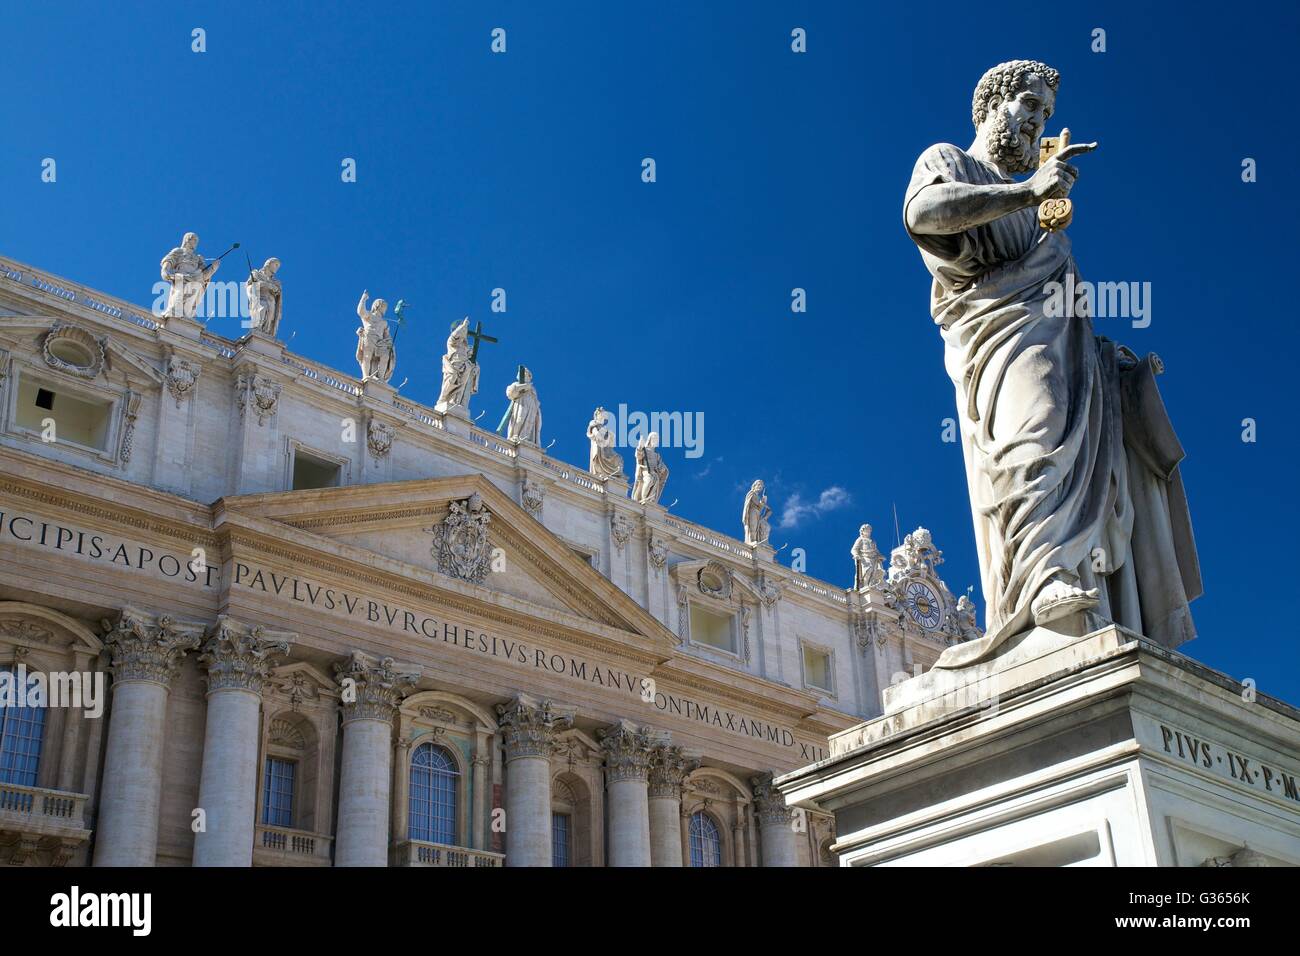 Statue of St Peter outside St Peter's Cathedral, Vatican, Rome, Italy, Europe Stock Photo